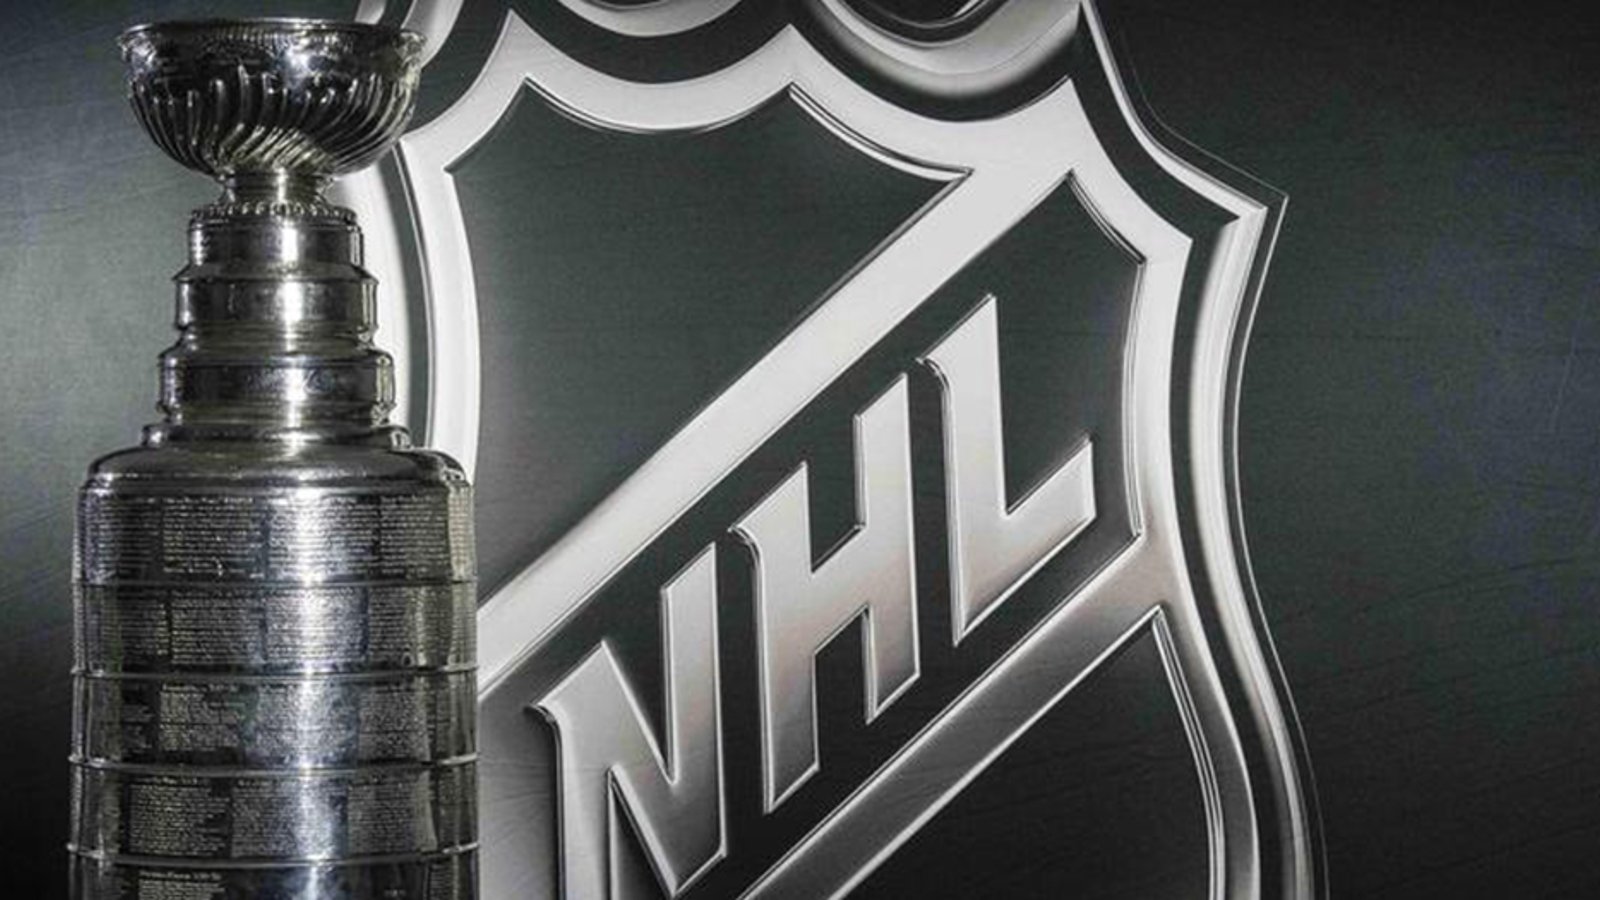 NHL has set the start date for qualifying rounds.